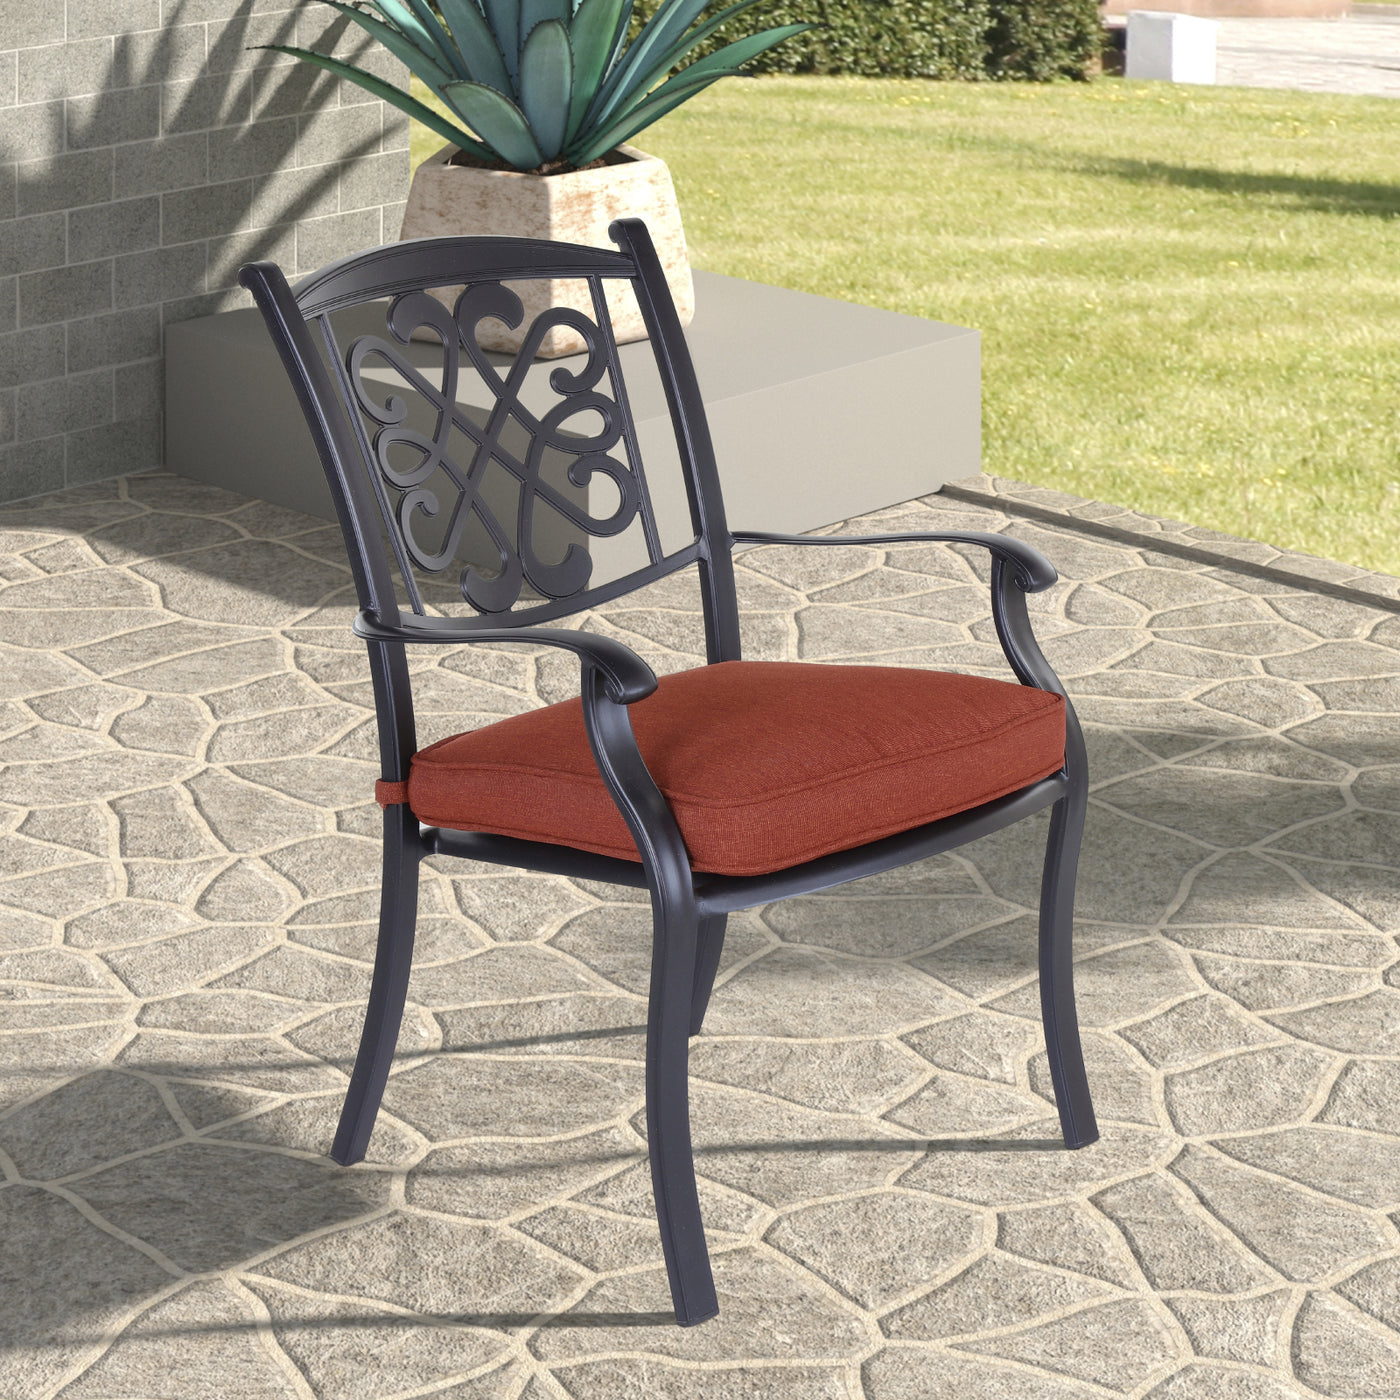 4PCS Outdoor Patio Aluminum Chairs with Cushions for Bistro, Backyard, Garden